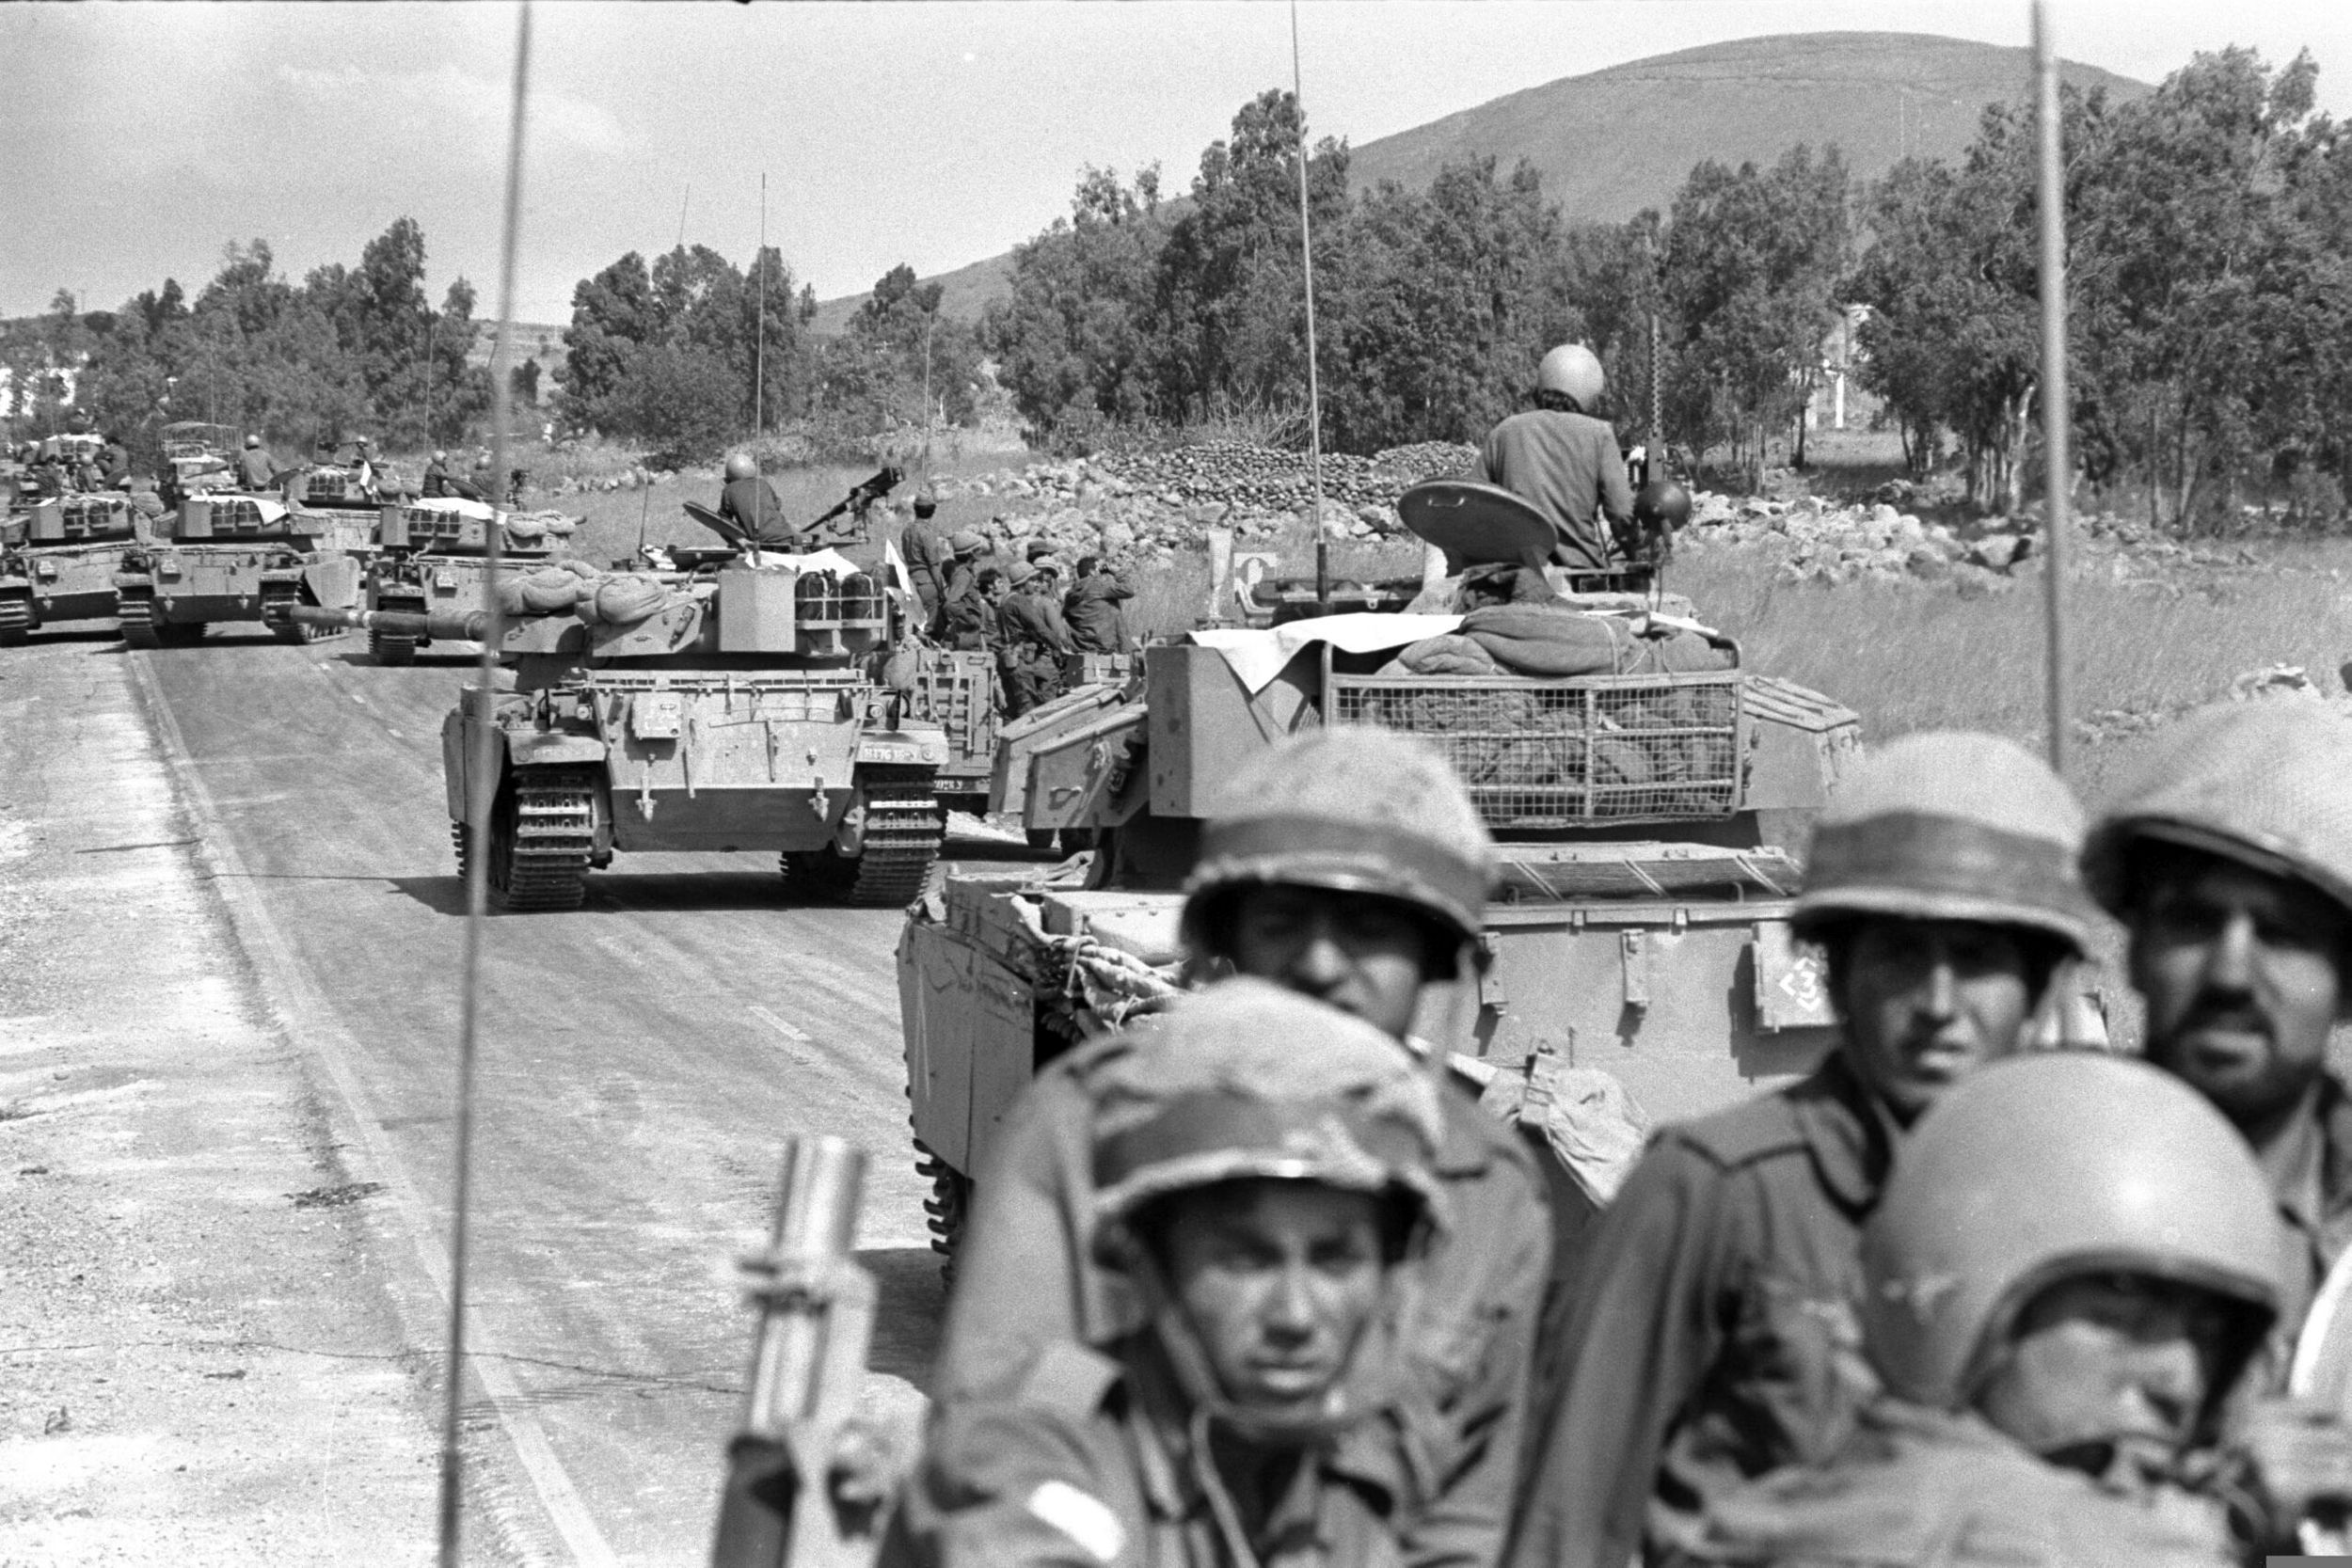 Troops rushing up to the northern frontier after the outbreak of the Yom Kippur War, October 7, 1973. Israeli strategy called for a token force on the Golan Heights to be able to hold off any attack for a day to allow reserves to be brought in. They did just manage to do so against an unexpectedly large Syrian assault.